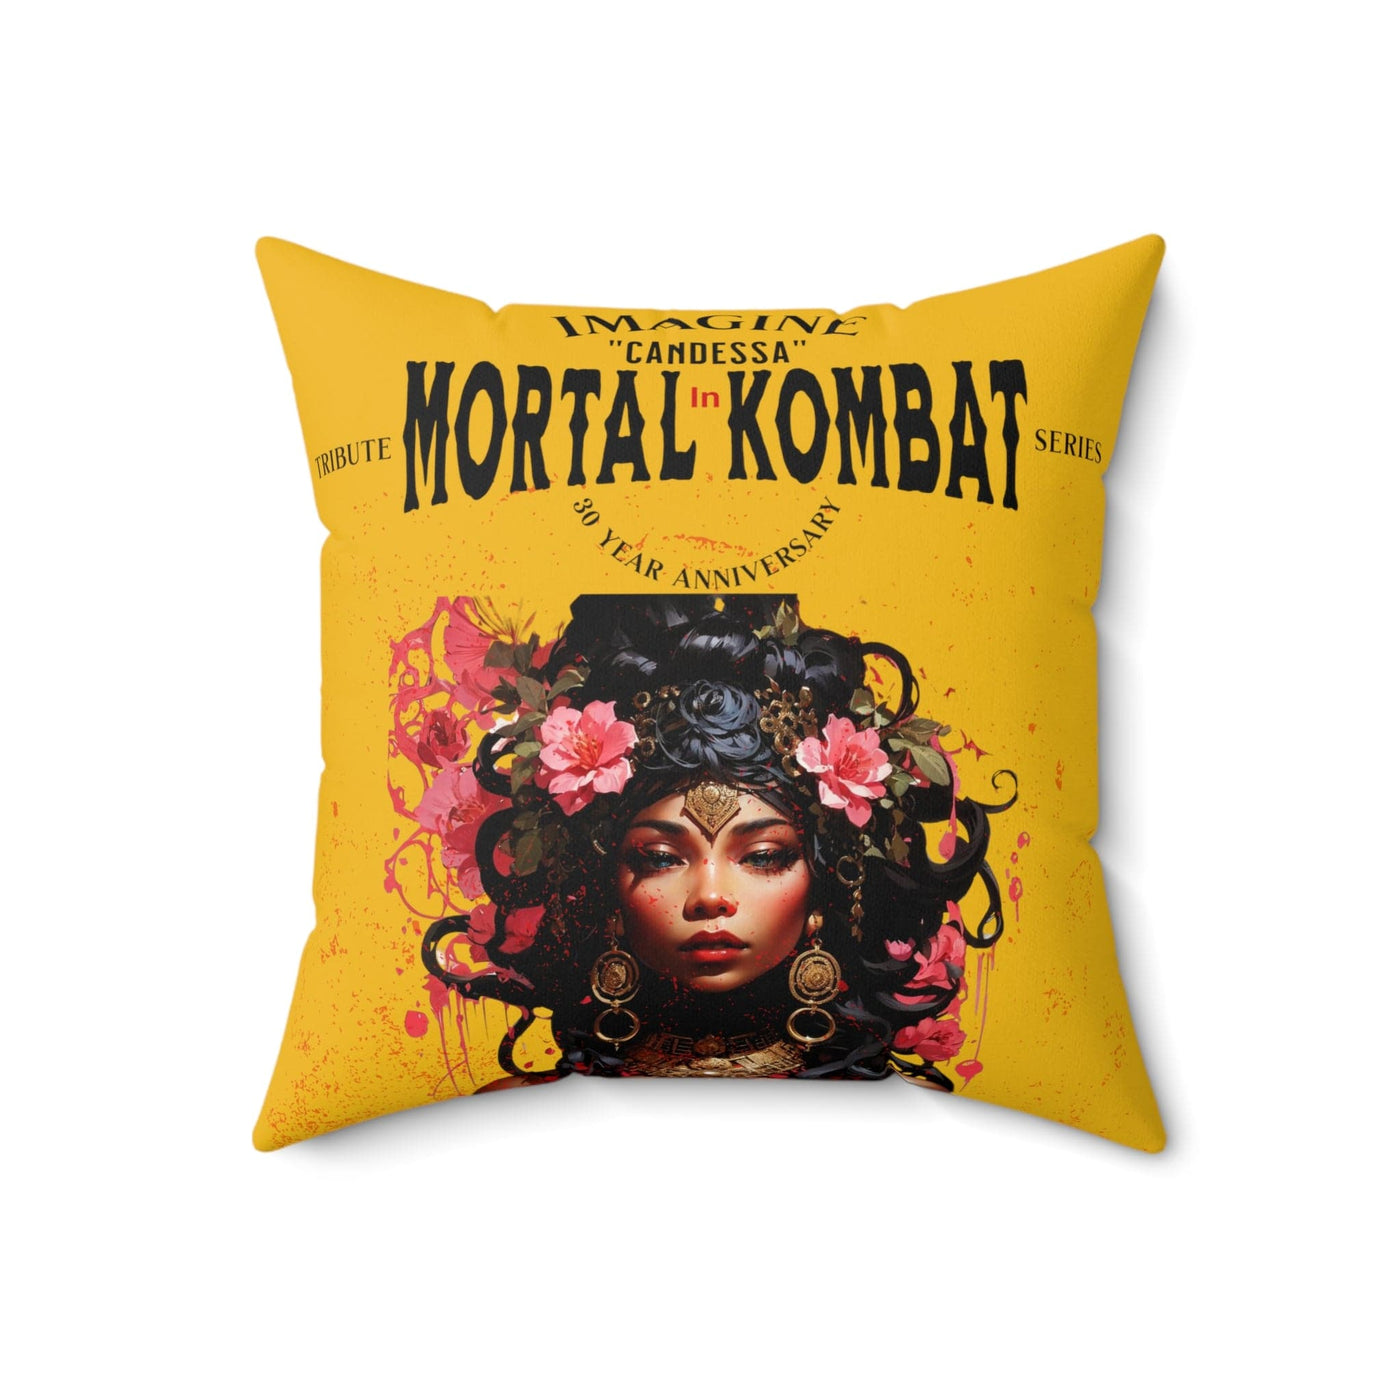 Gamer Fresh | Candessa Mortal Kombat 30th Anniversary Tribute Series | Imagine If Collection | Yellow Square Pillow